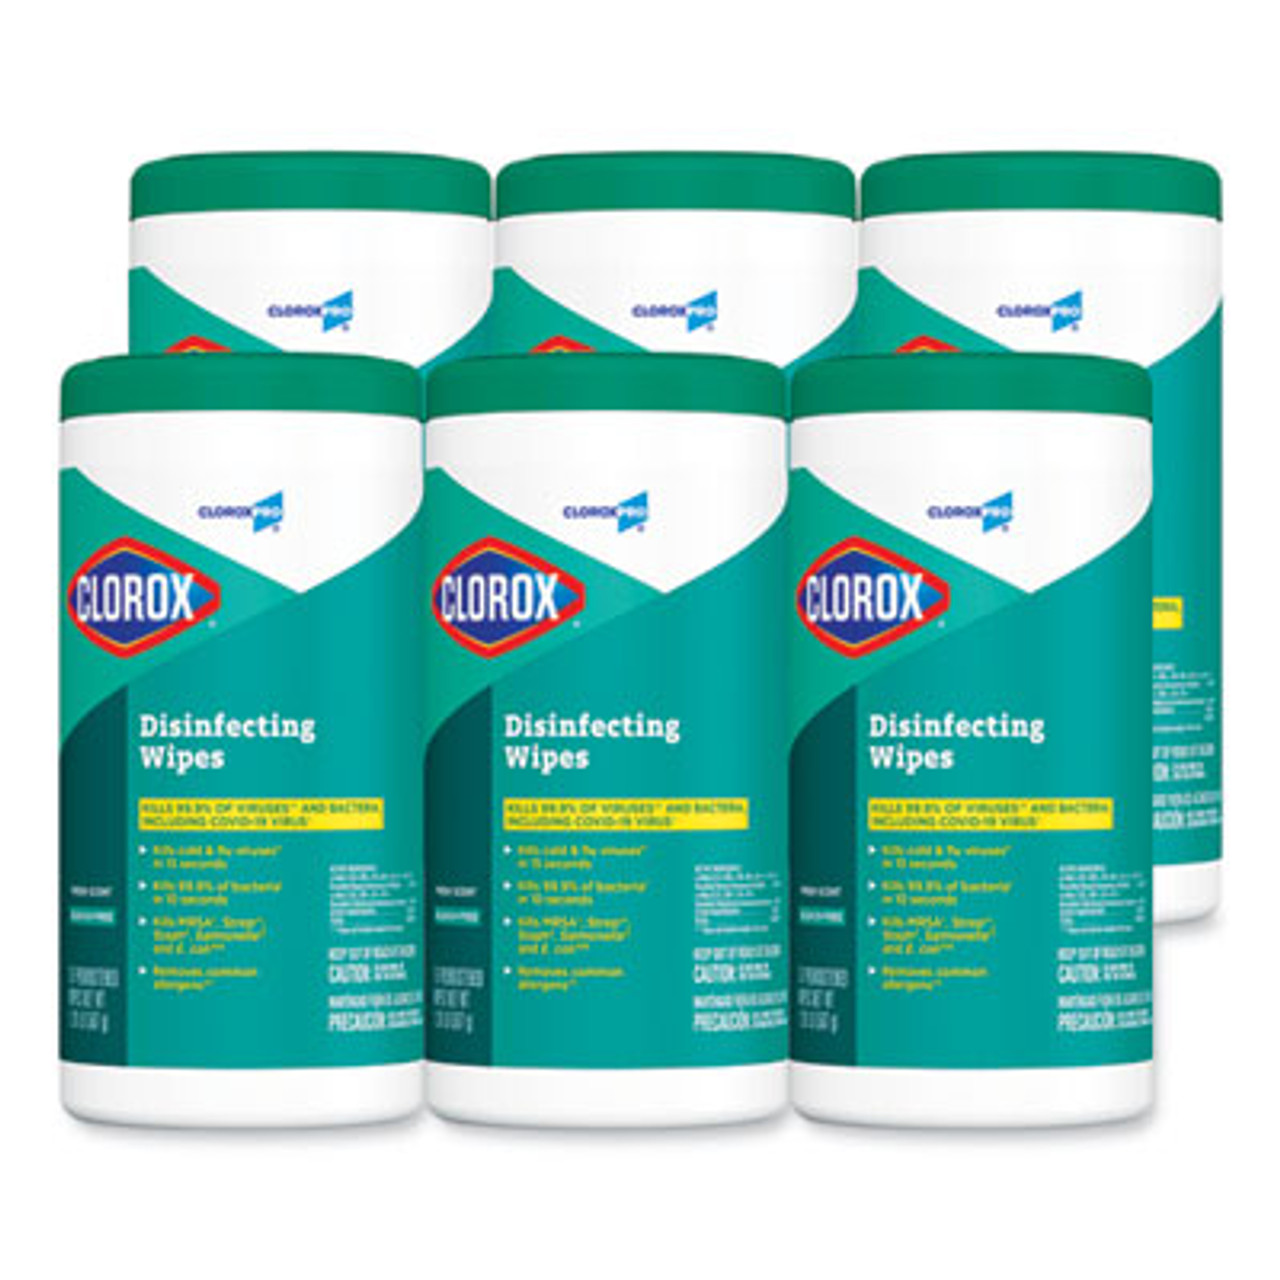 CLOROX DISINFECTING AND CLEANING WIPES FRESH SCENT, BLEACH-FREE 7 X 8  SHEET SIZE, 6 TUBS OF 75 WIPES PER CASE